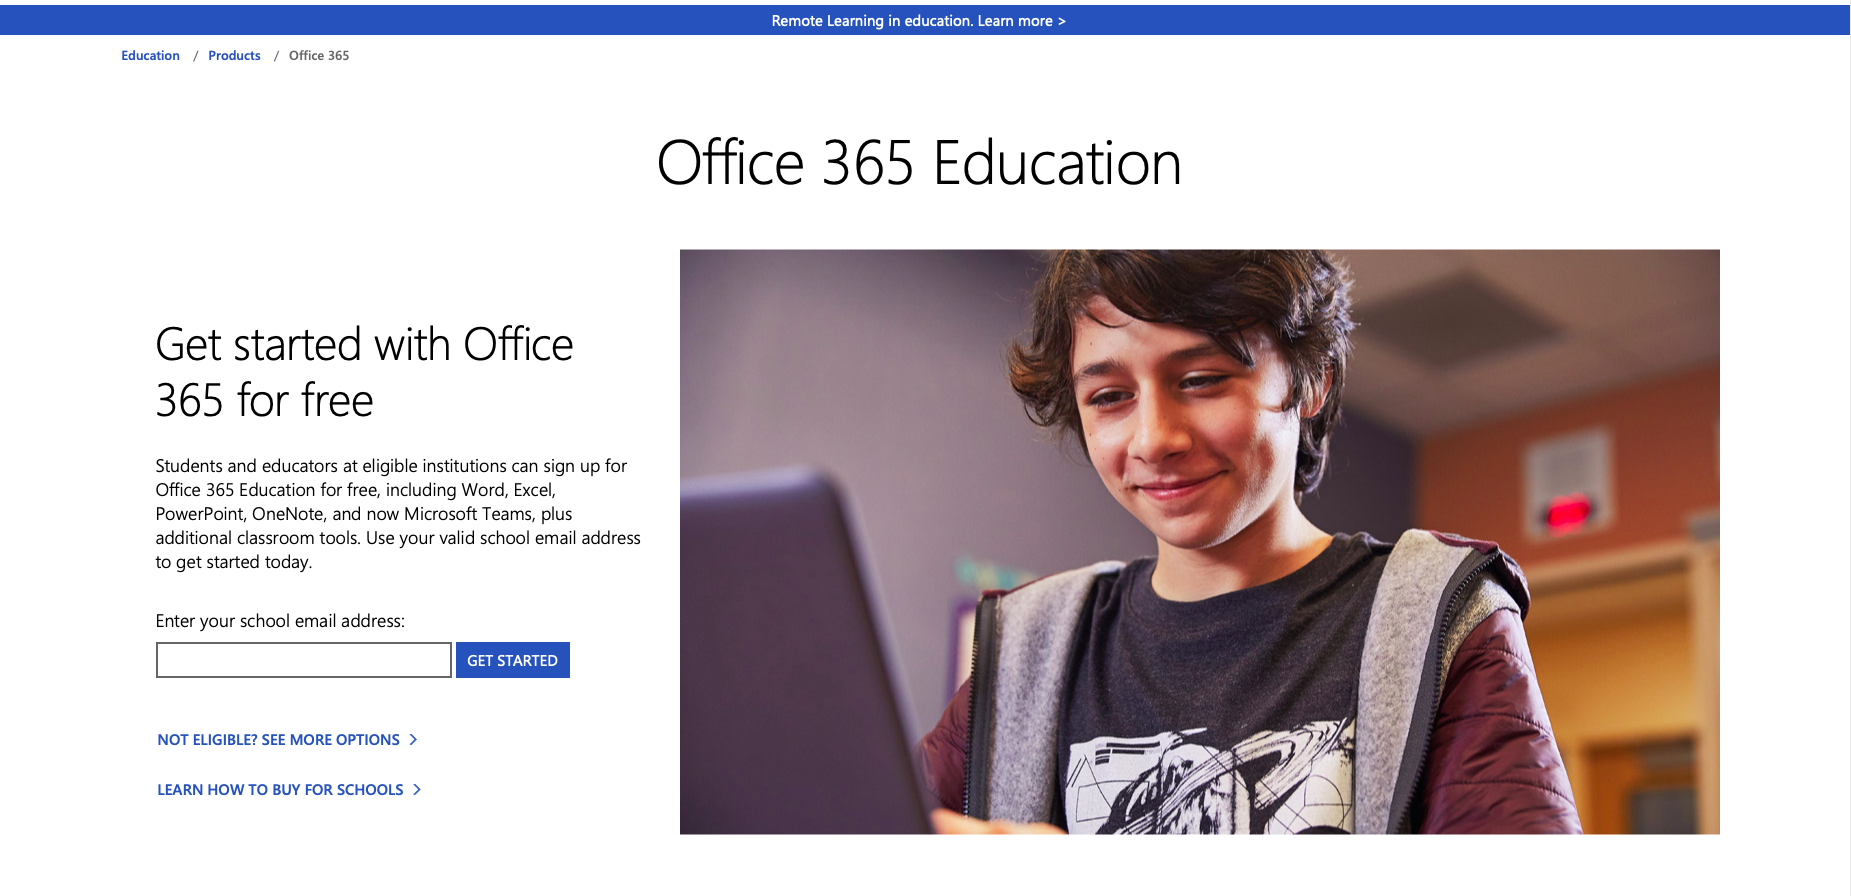 microsoft office for students mac